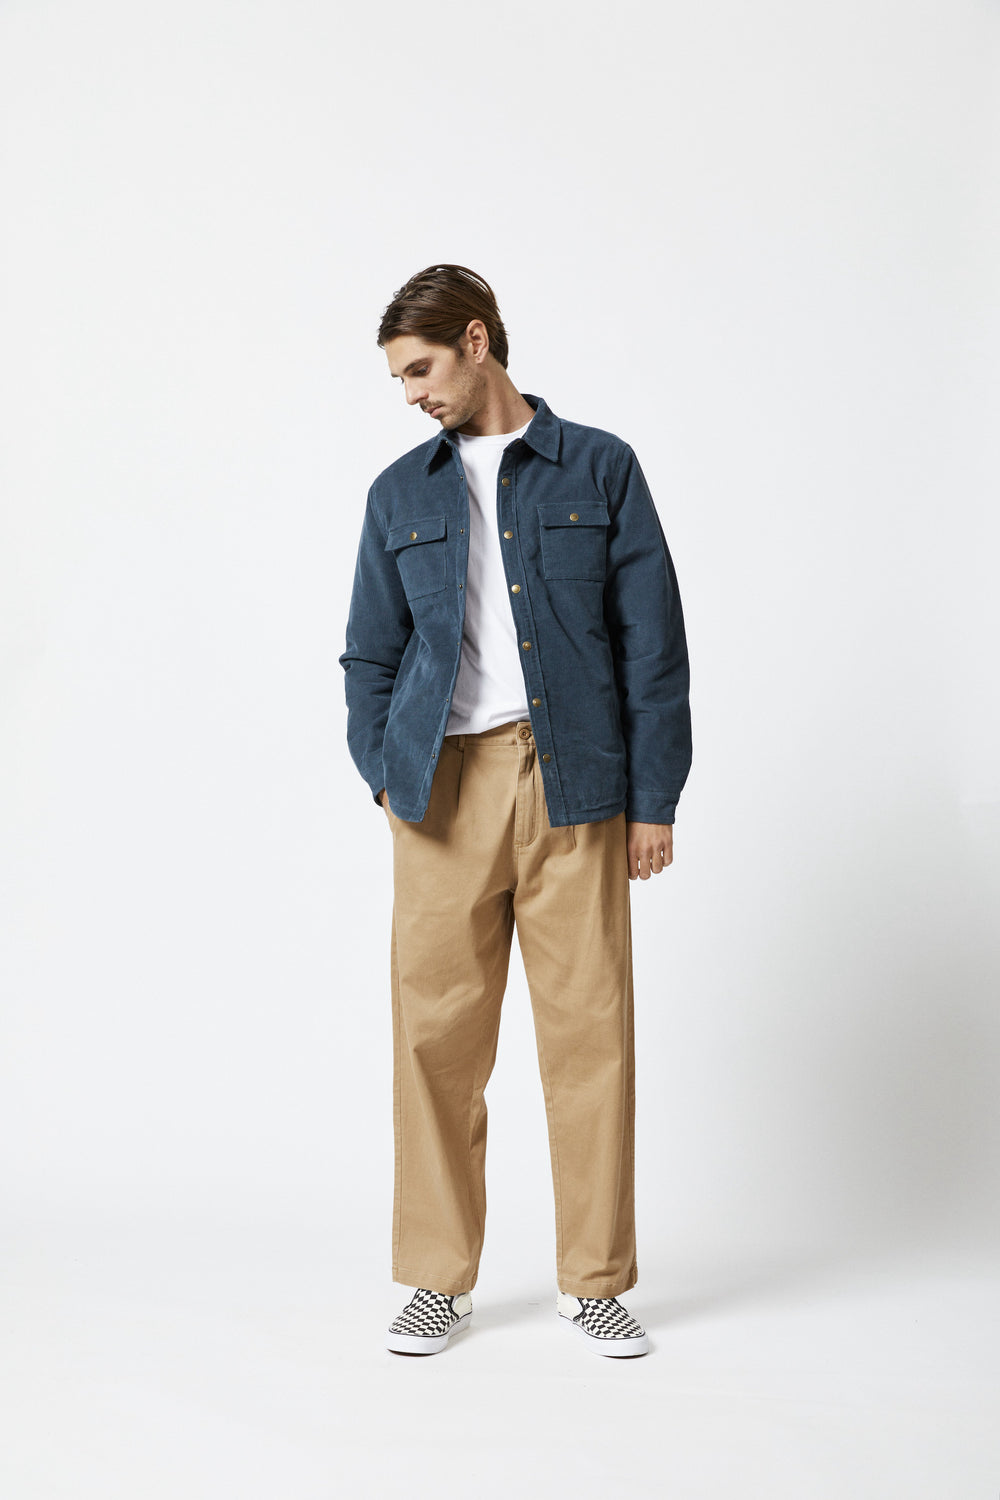 Mr Simple - Quilted Cord Jacket in Petrol | Buster McGee